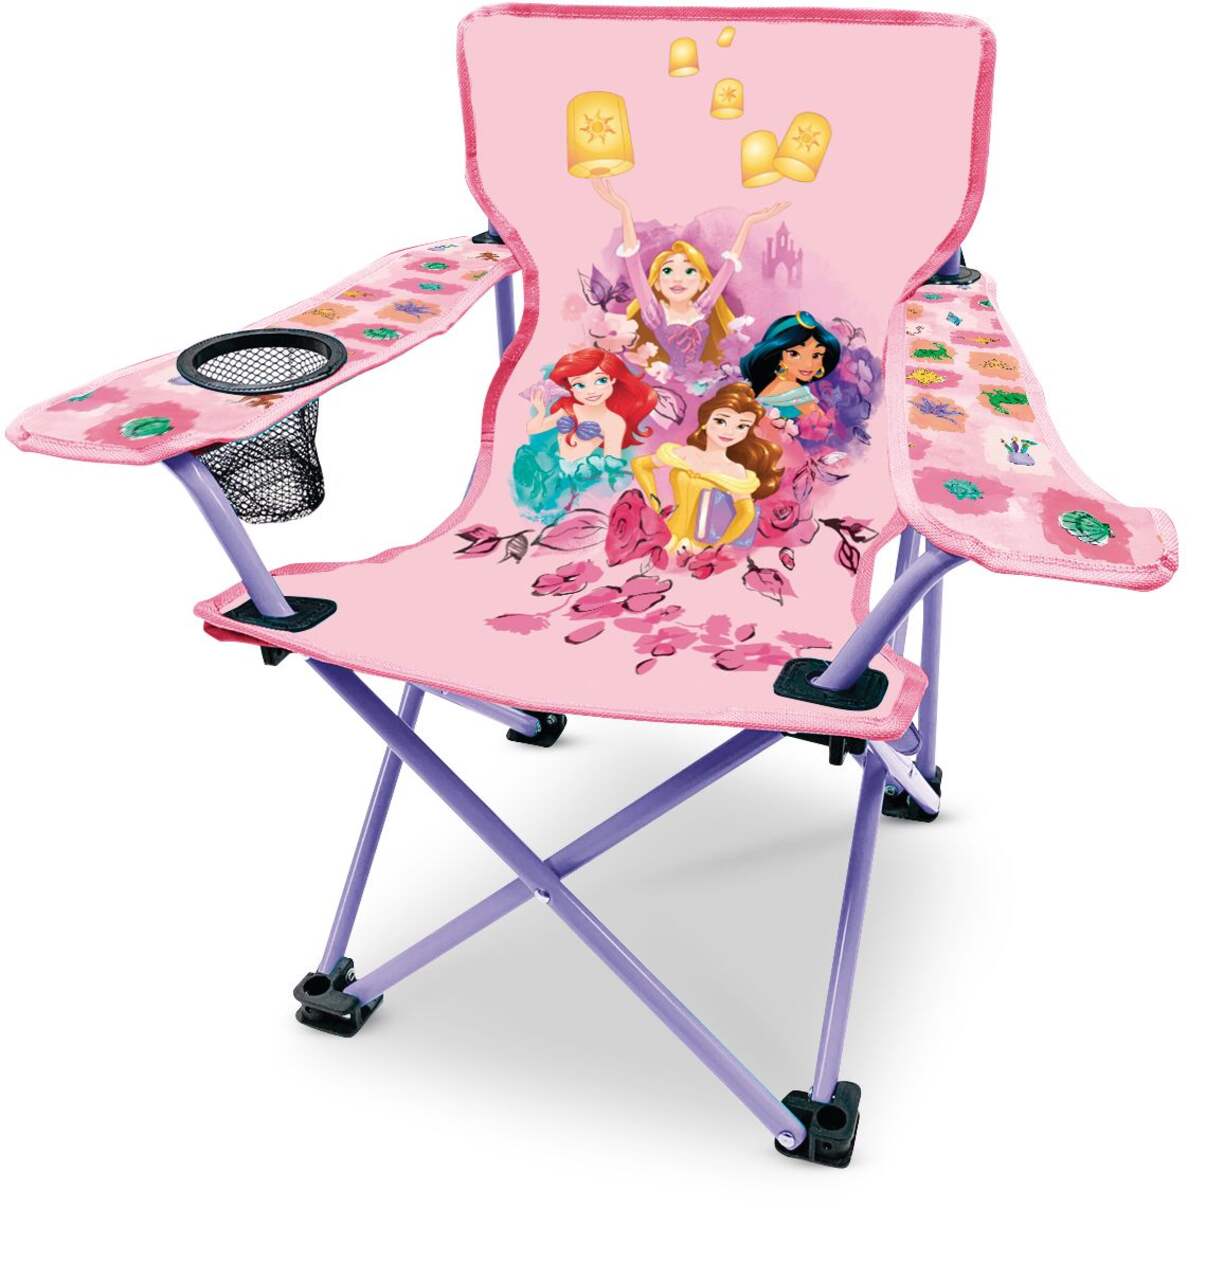 https://media-www.canadiantire.ca/product/playing/camping/camping-furniture/0762481/frozen-junior-quad-chair-girls-9f0fde62-b2d0-4d5c-9272-e665d885bd40-jpgrendition.jpg?imdensity=1&imwidth=1244&impolicy=mZoom